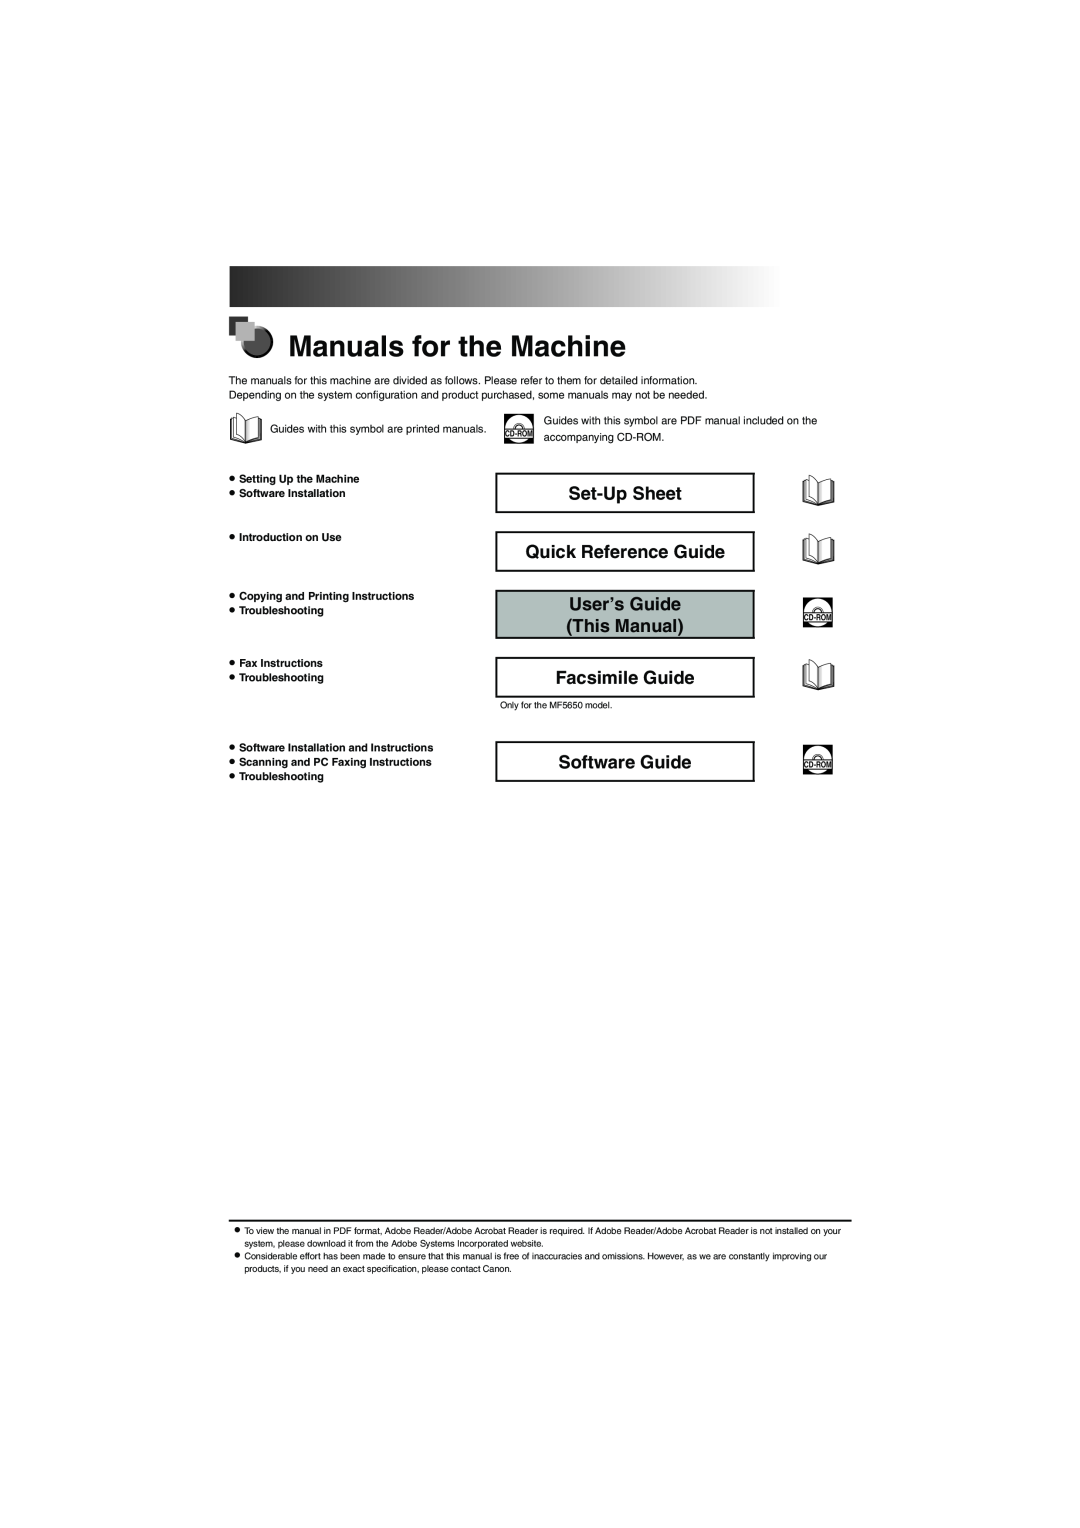 Canon MF5650 manual Set-Up Sheet, Quick Reference Guide, User’s Guide, This Manual, Software Guide, Manuals for the Machine 